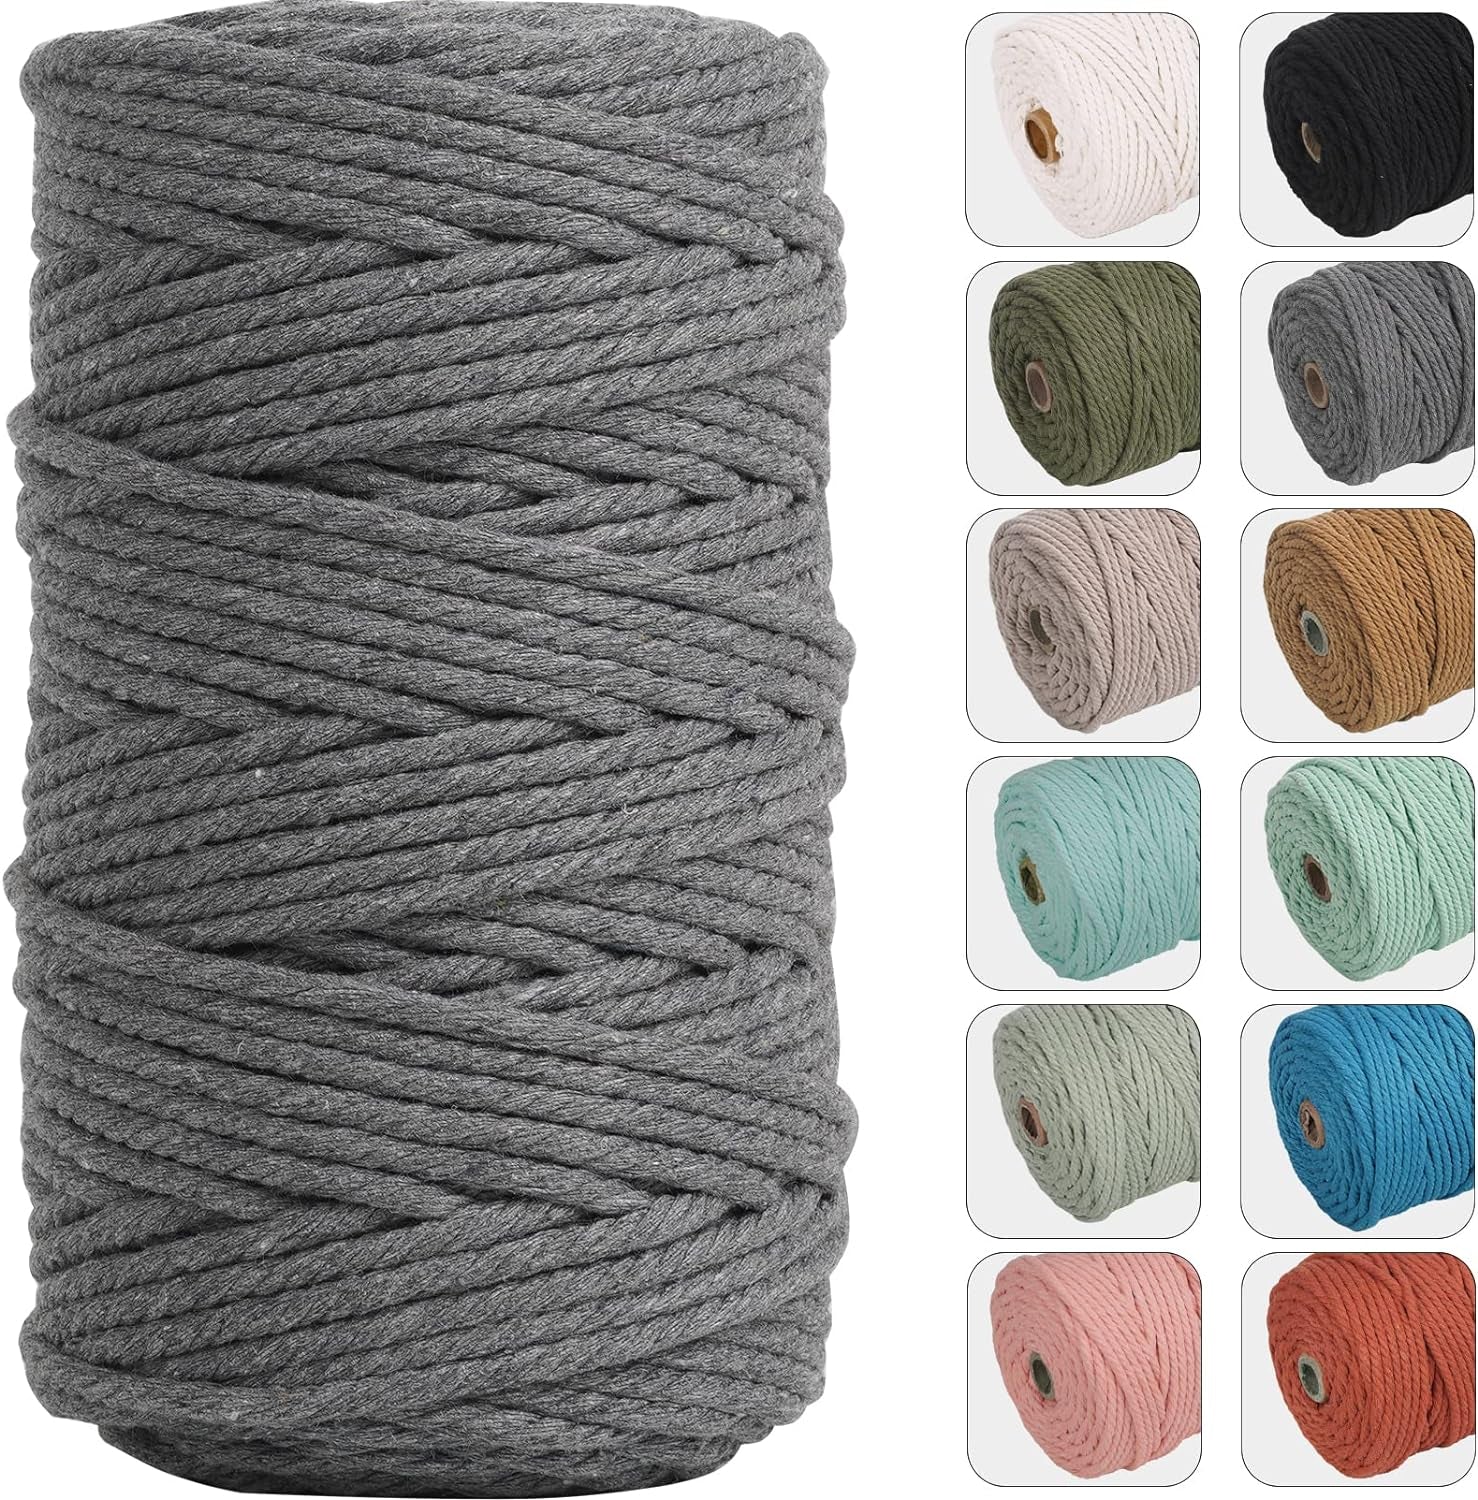 4Mm 109Yards Macrame Cord Natural Color Cotton Rope for Wall Hanging, Plant Hangers, Crafts, Knitting